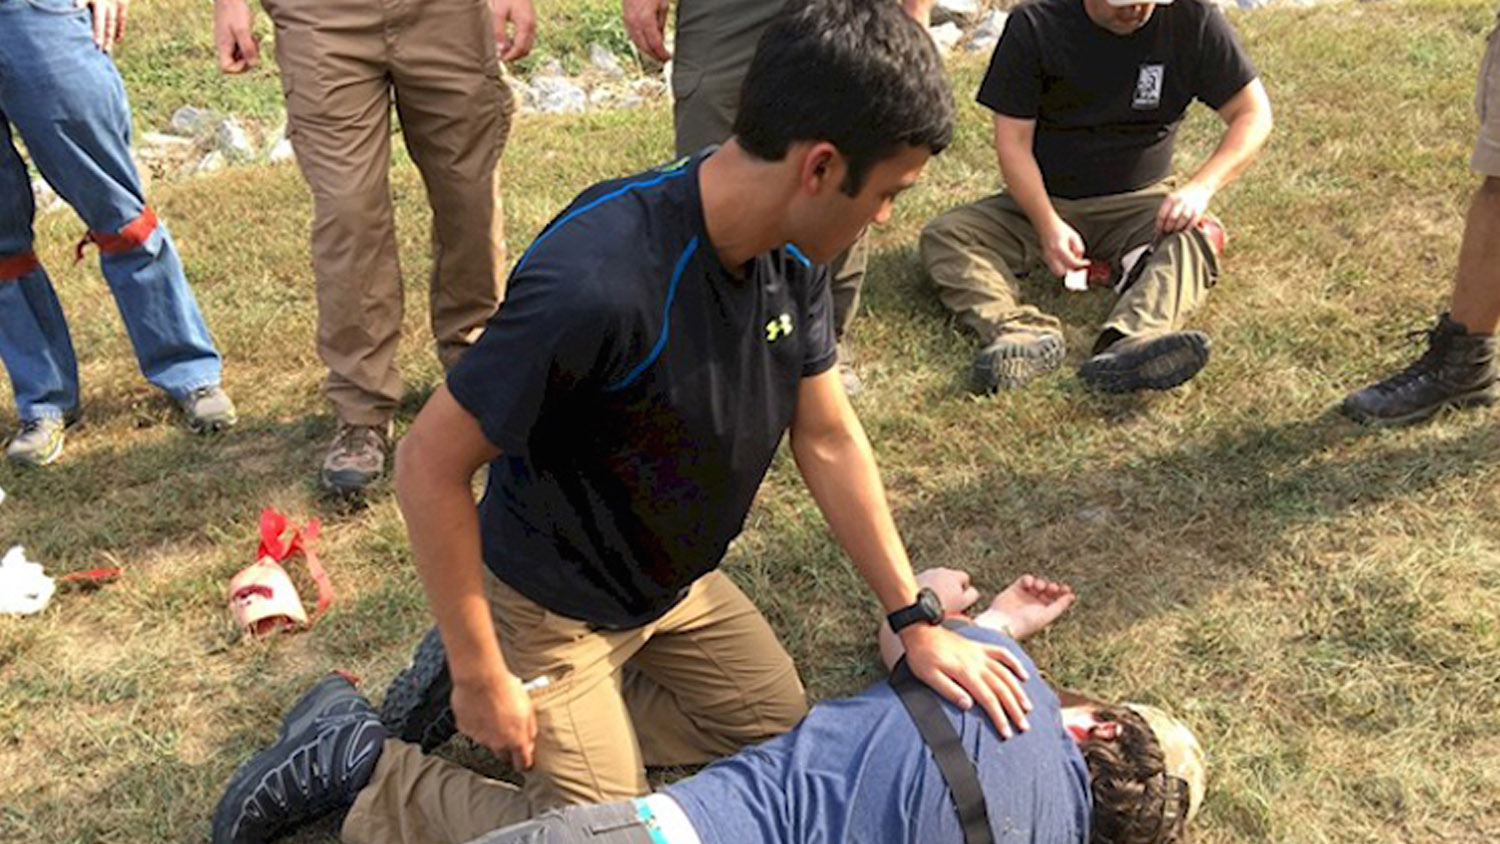 NRA Outdoors’ Emergency Casualty Care Course Builds Critical Life-Saving Skills